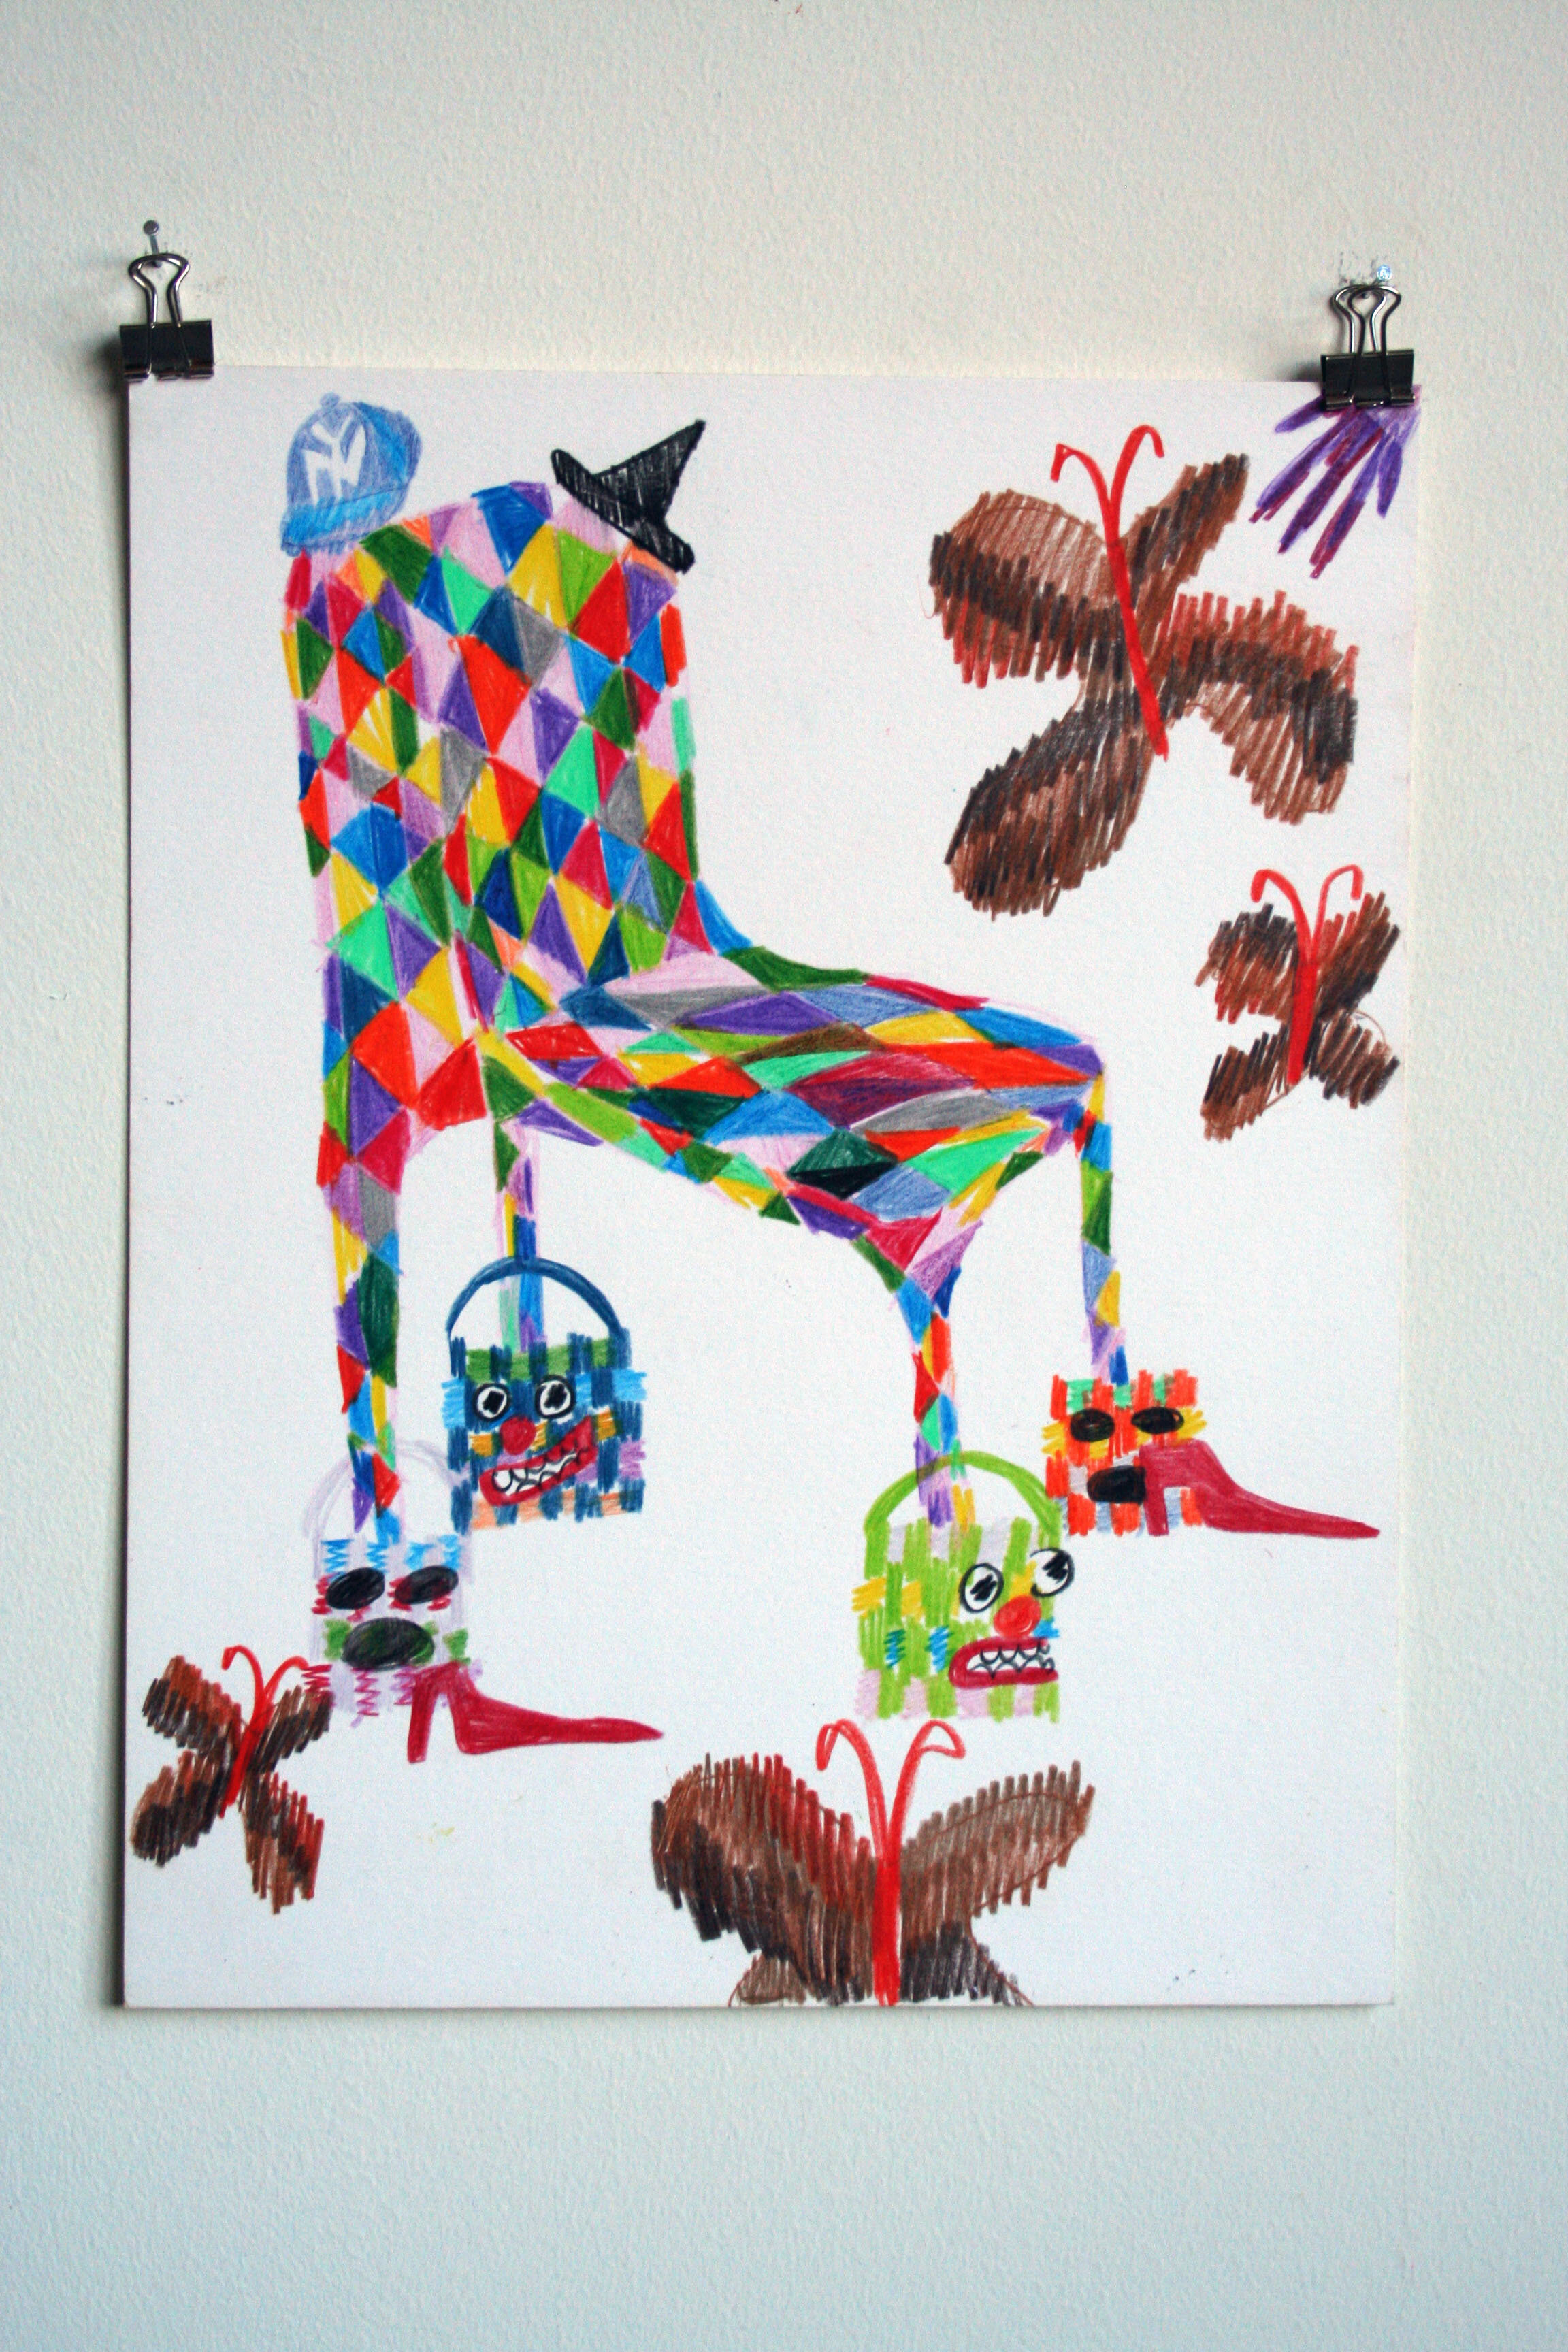   Jester Chair Wearing 2 Hats,  2013  14 x 11 inches (35.56 x 27.94 cm.) Colored pencil on paper 